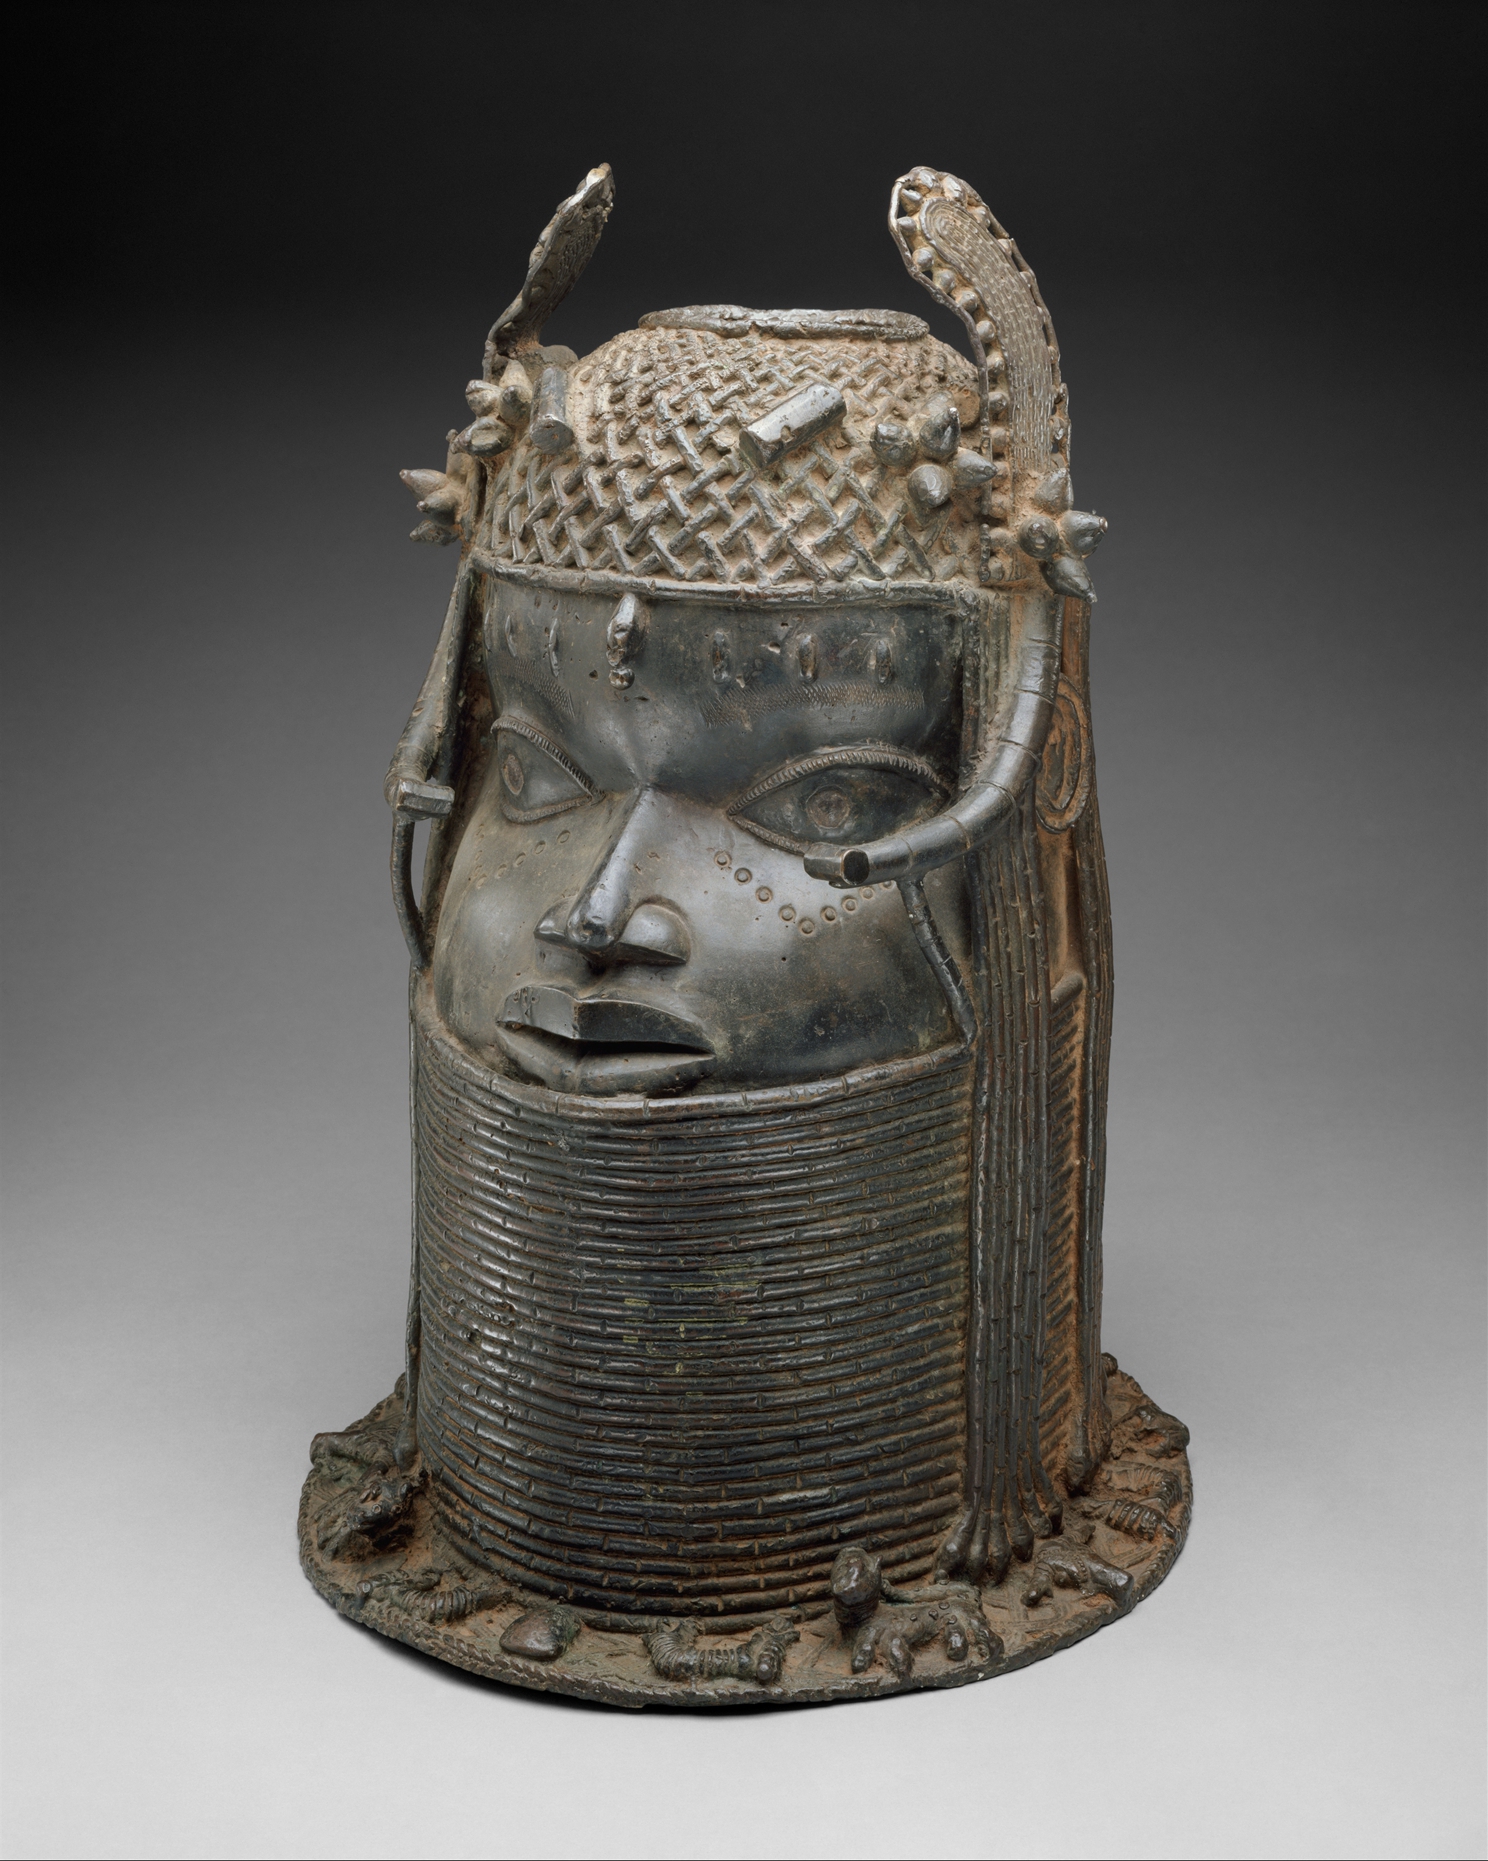 Head of an Oba by Unknown Artist - 19th century - 45.7 × 29.2 × 29.8 cm Metropolitan Museum of Art